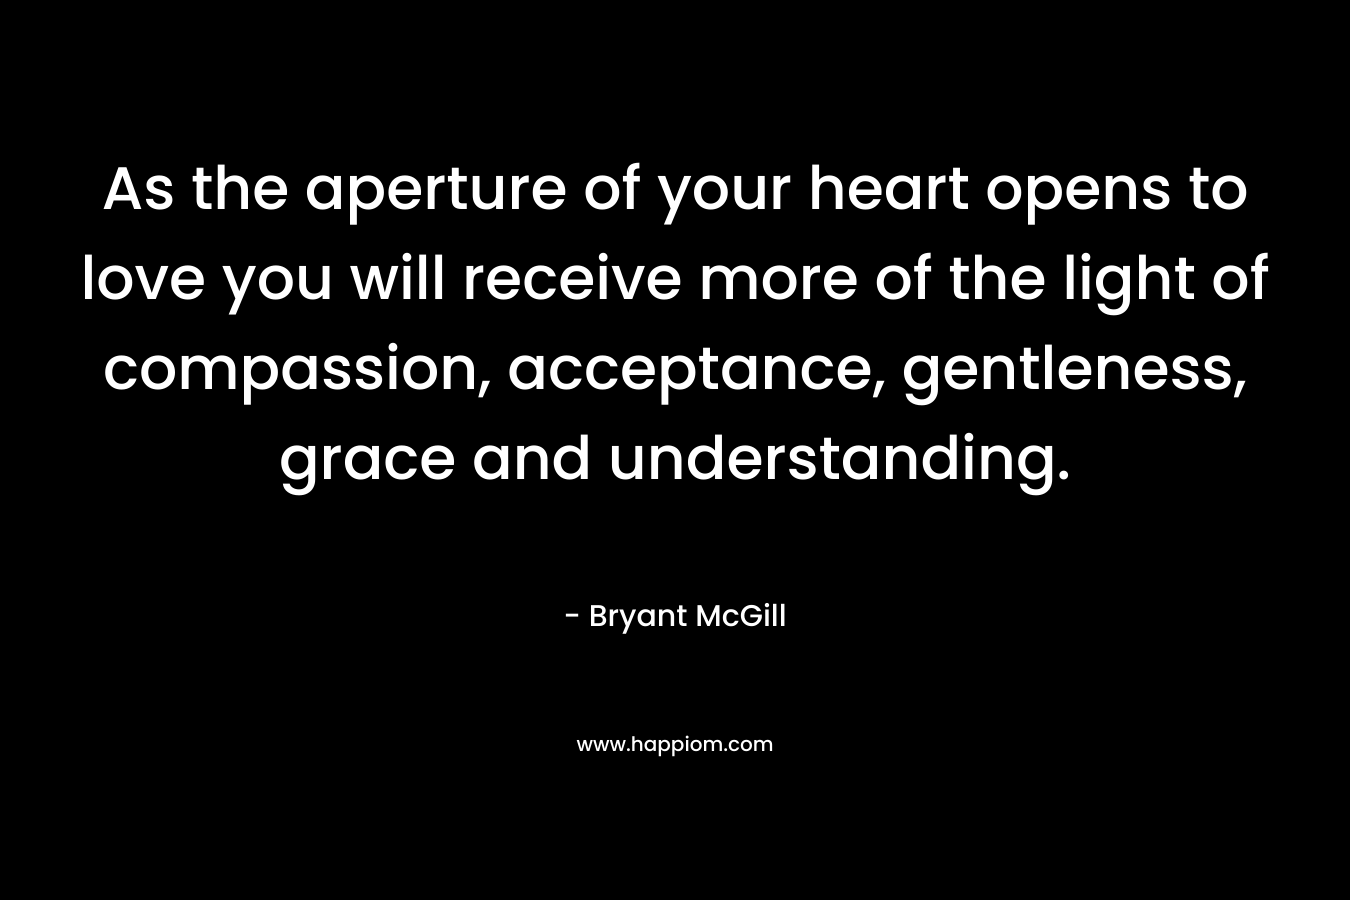 As the aperture of your heart opens to love you will receive more of the light of compassion, acceptance, gentleness, grace and understanding. – Bryant McGill